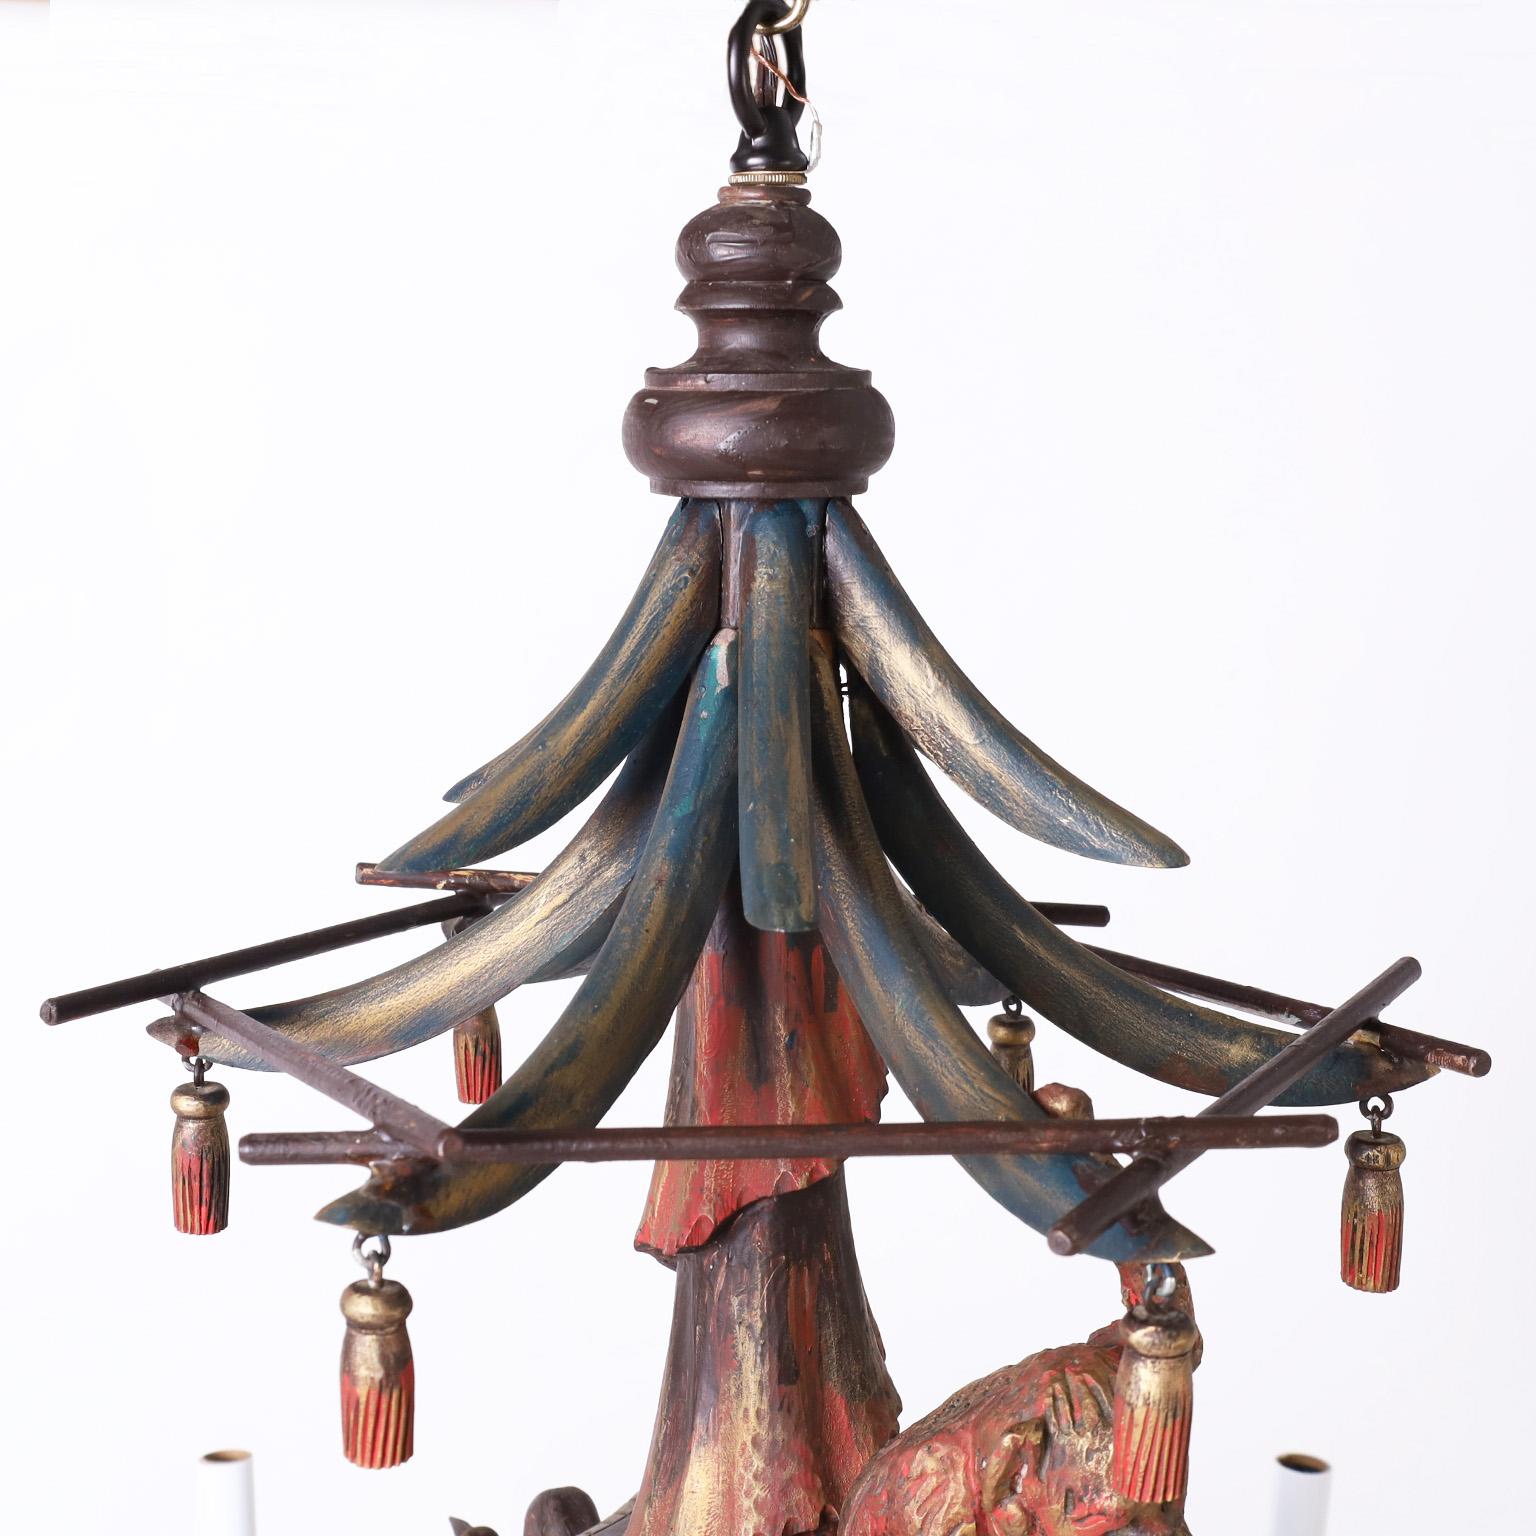 Whimsical vintage chandelier with asian motifs crafted in wood paint decorated in a polychrome style featuring a pagoda form top, carved drapery, wood tassels, a carved monkey, faux bamboo arms and supports with an artichoke finial. One of two